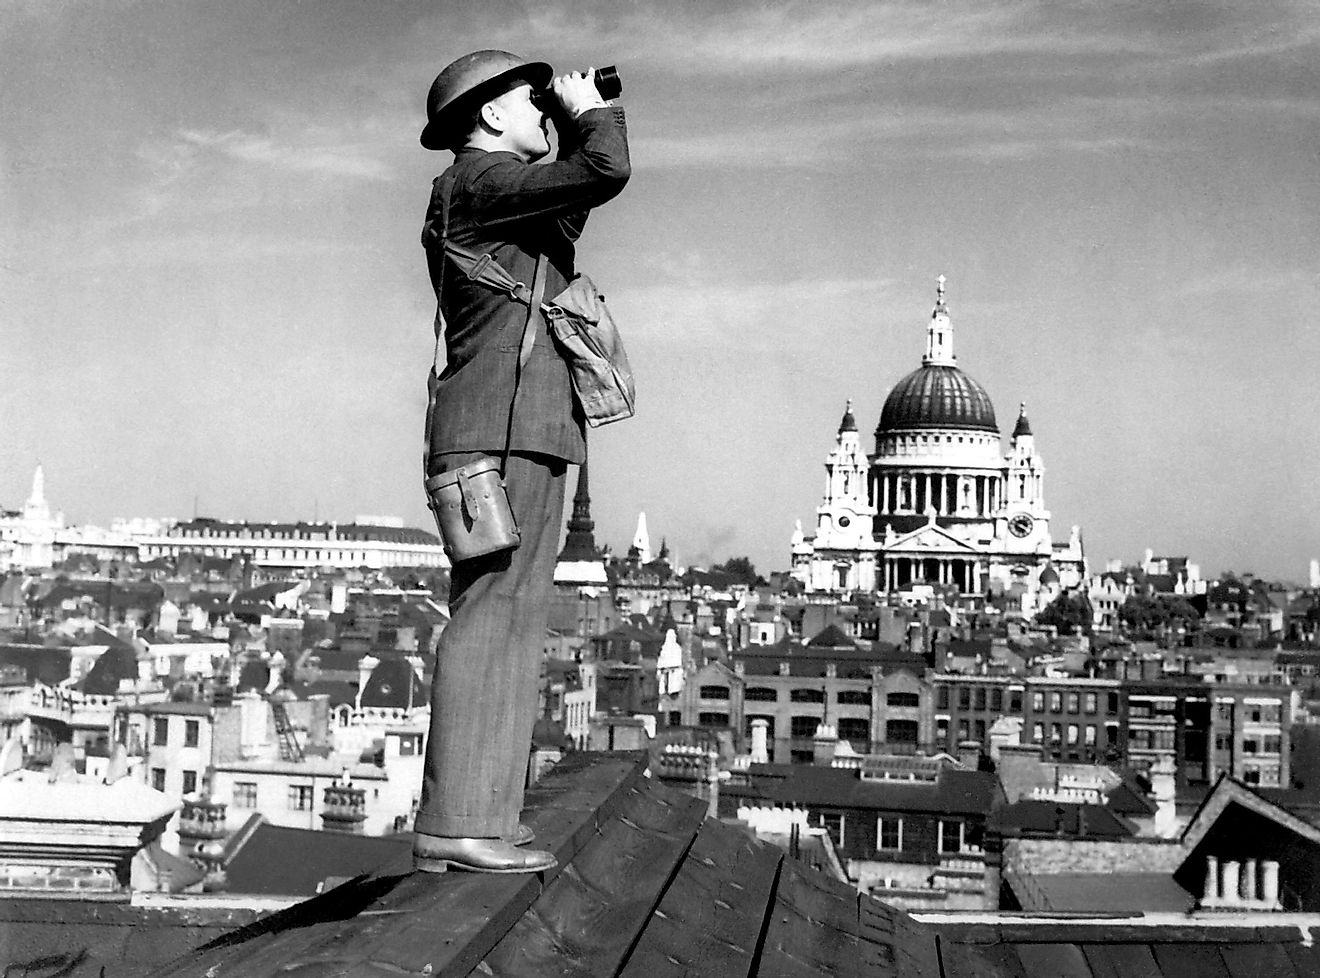 Aircraft spotter searches the sky with binoculars during the Battle of Britain. St. Paul's Cathedral is in the background. World War 2.